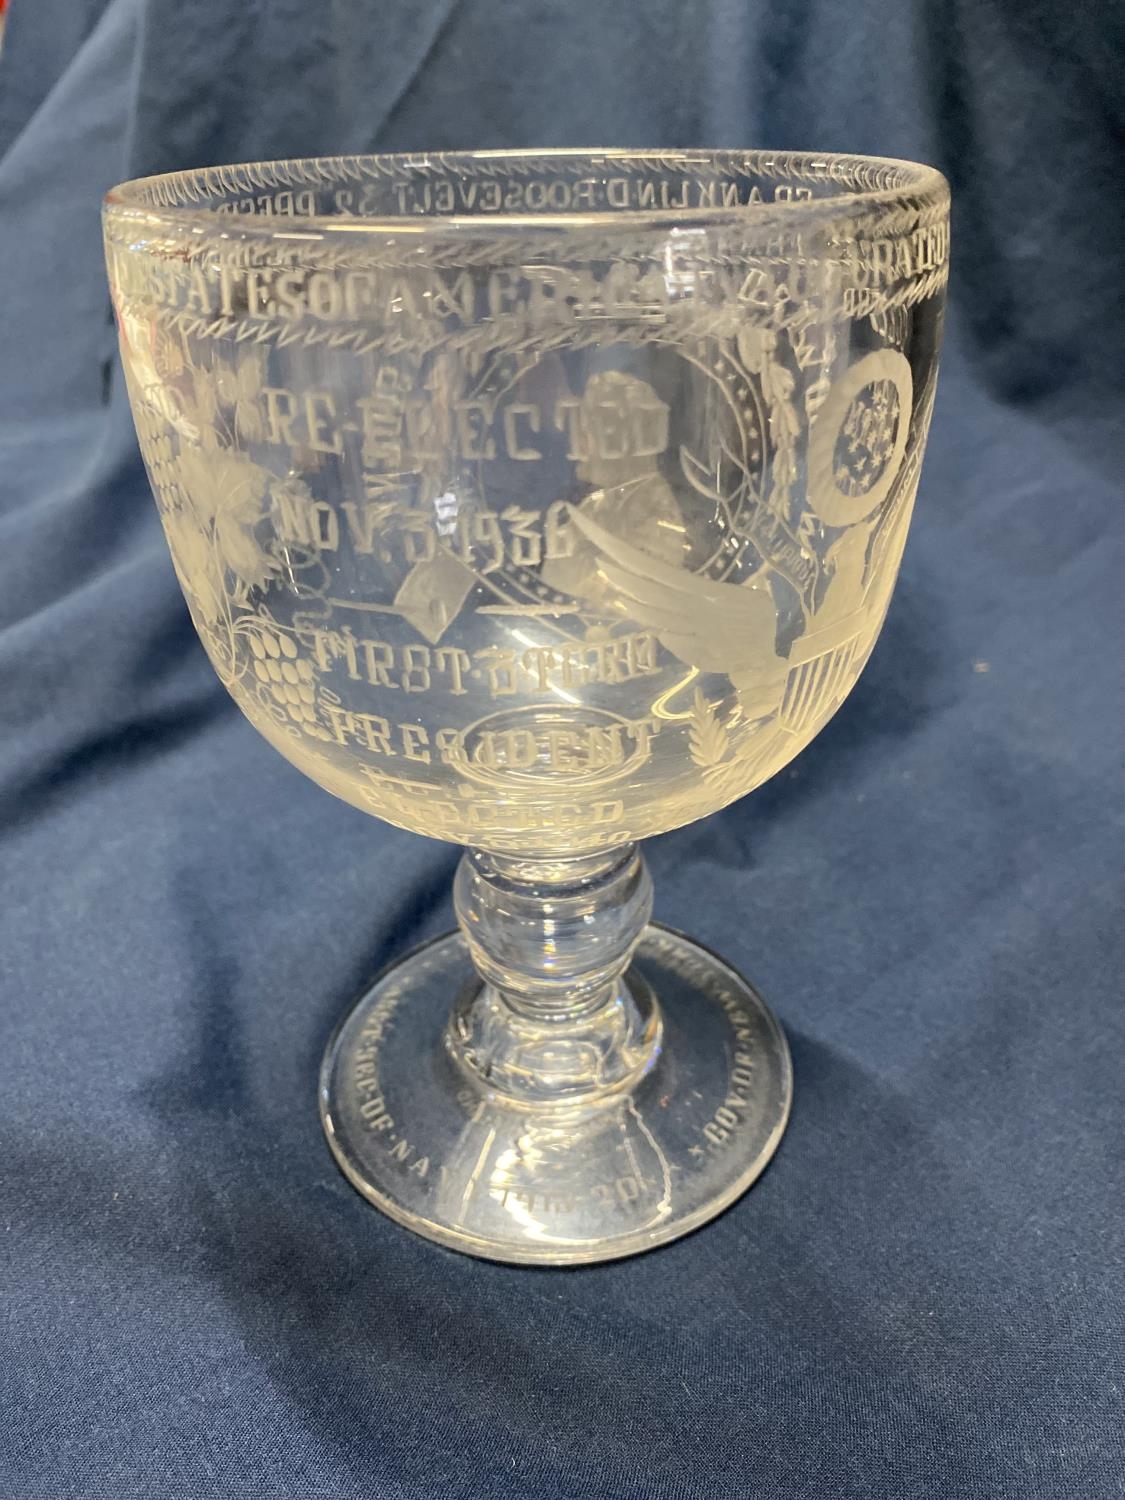 A large American limited edition glass chalice celebrating Franklin D Roosevelt 32nd President of - Image 2 of 4